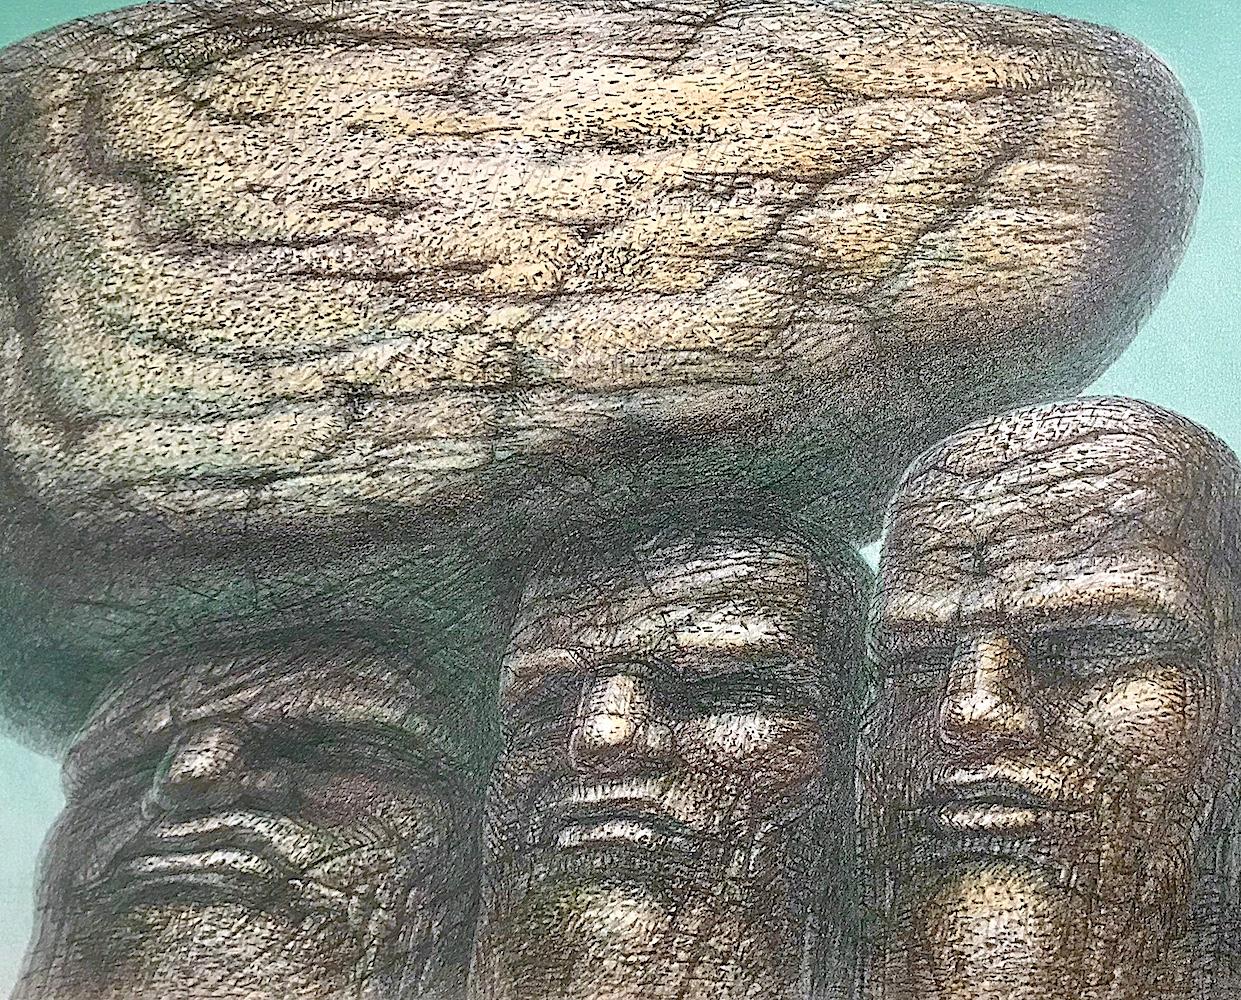 STONE CARRIERS Signed Hand Drawn Lithograph, Portrait Heads Stone Men Philosophy - Print by De Es Schwertberger